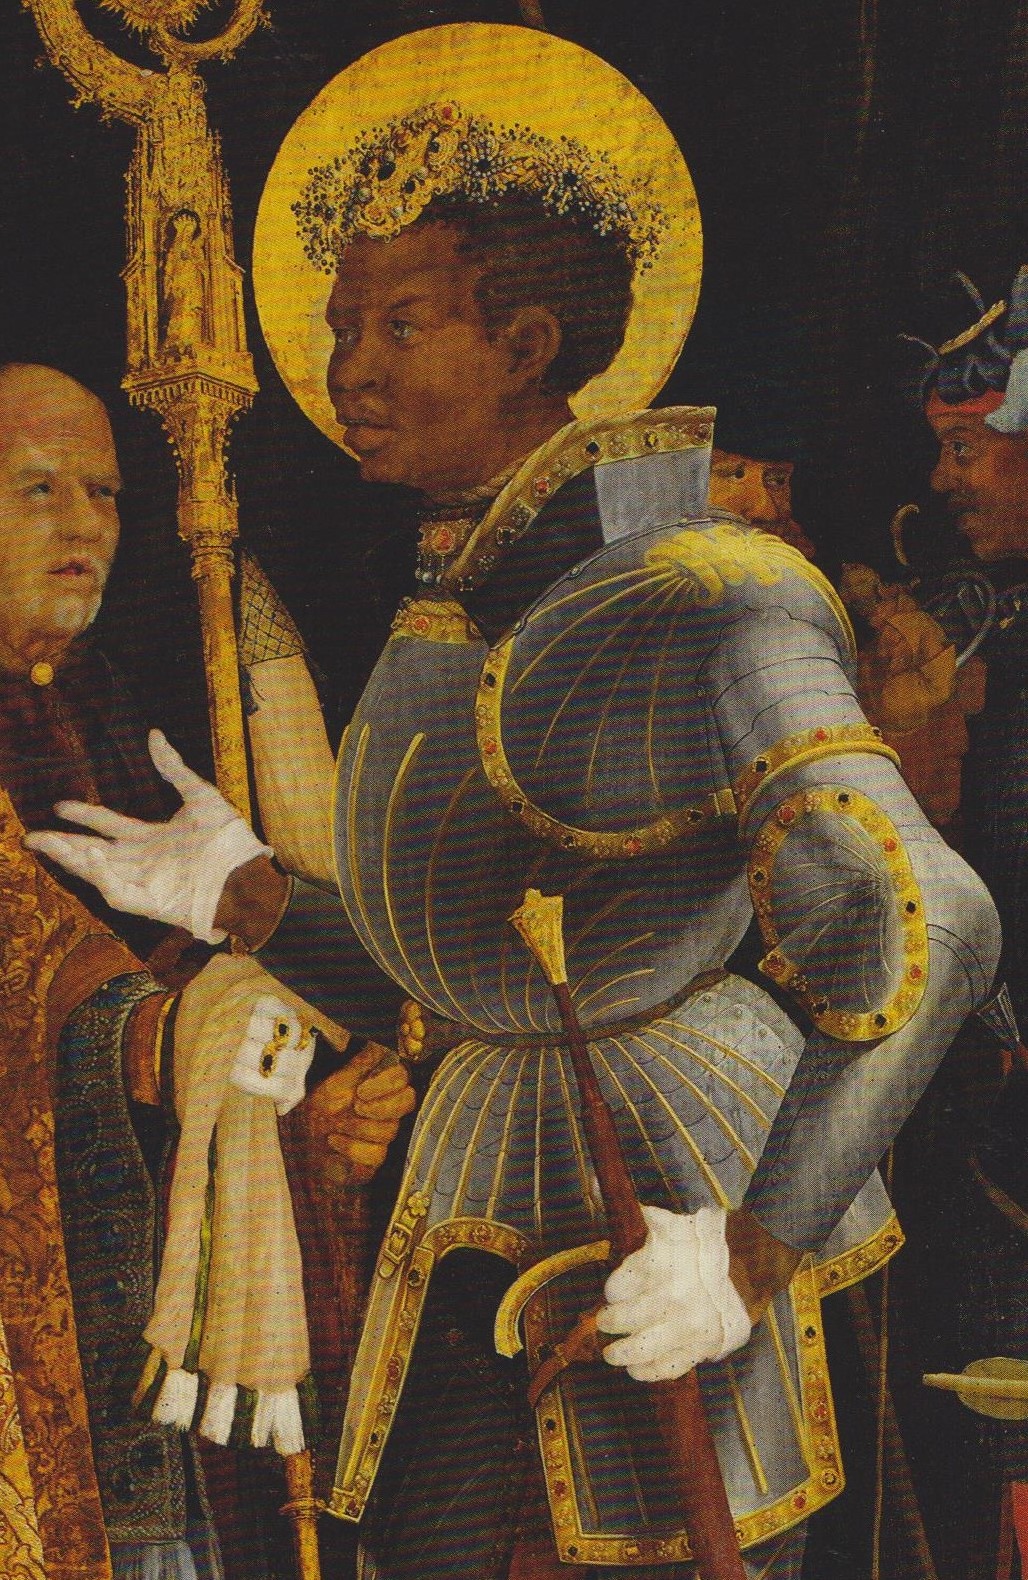 Surprised by Time: The black saint of the Holy Roman Empire